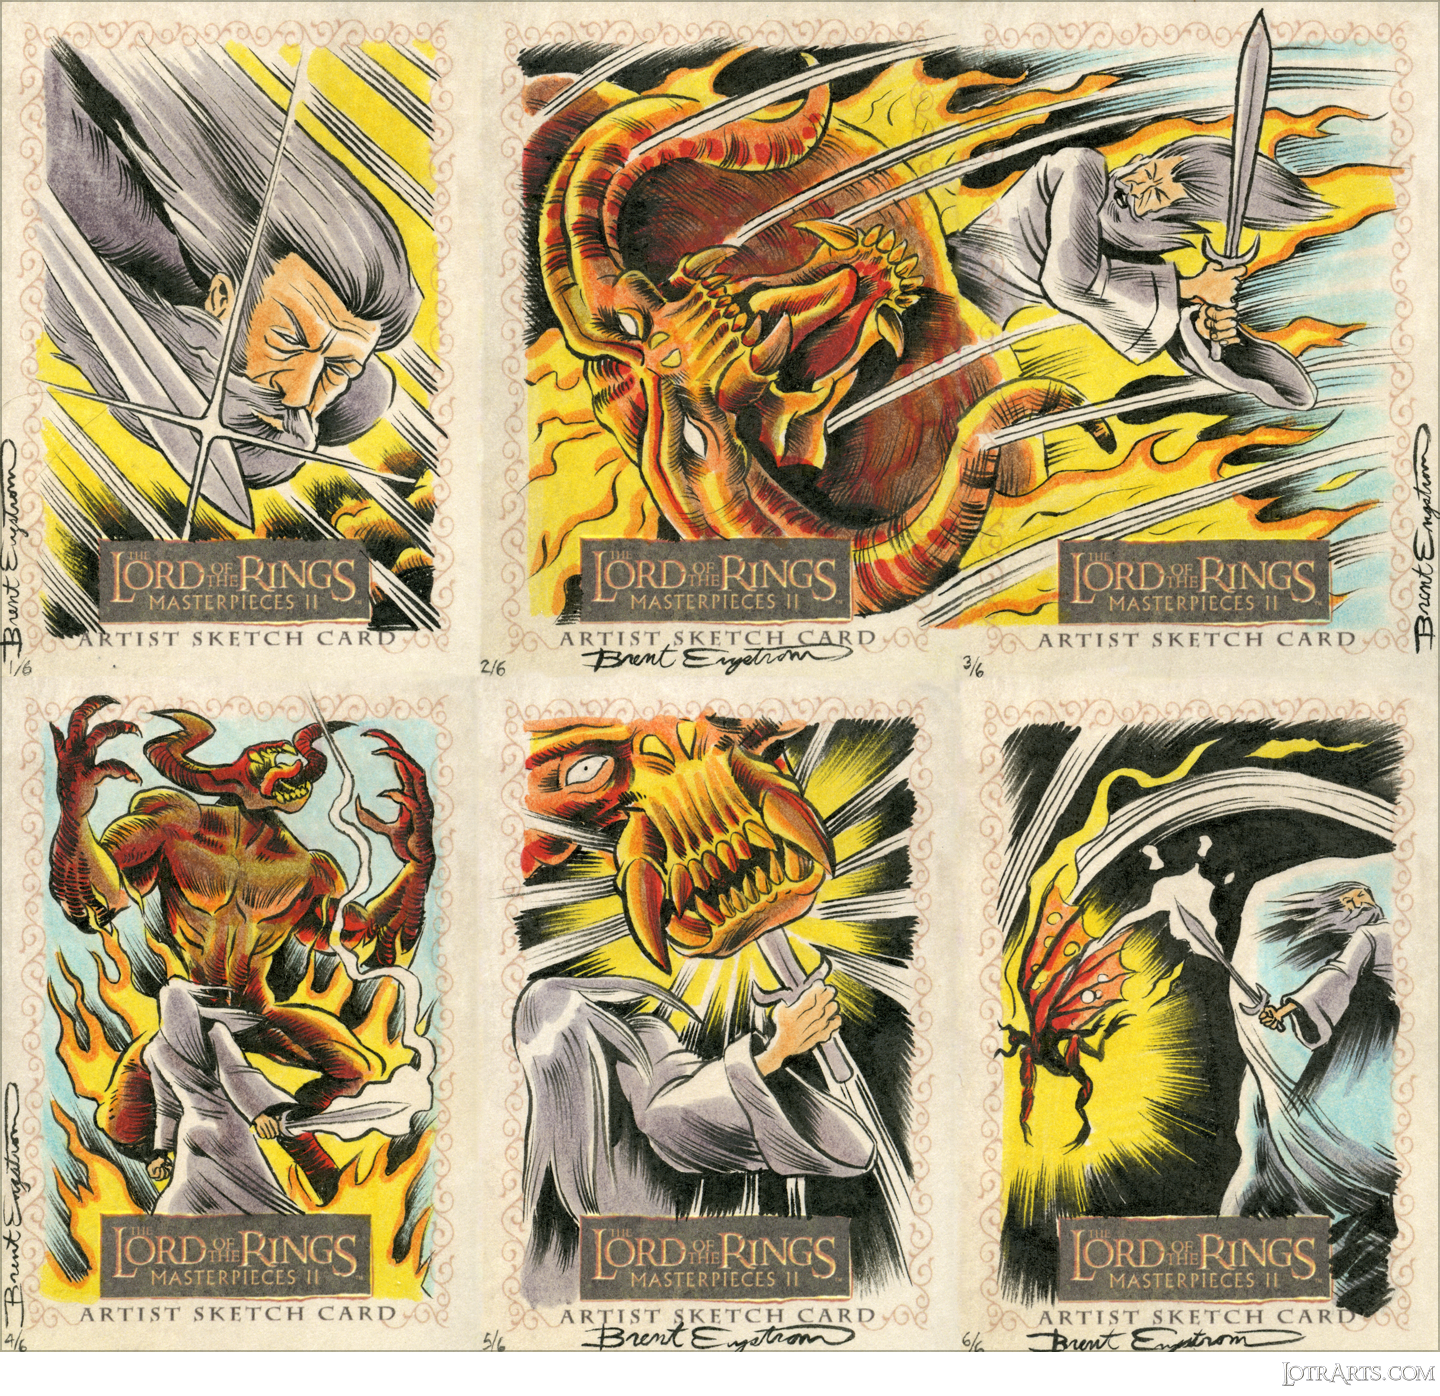 Battle of the Balrog and Gandalf, six-card sequenced scene panel, by Engstrom: artist return sketches<span class="ngViews">19 views</span>